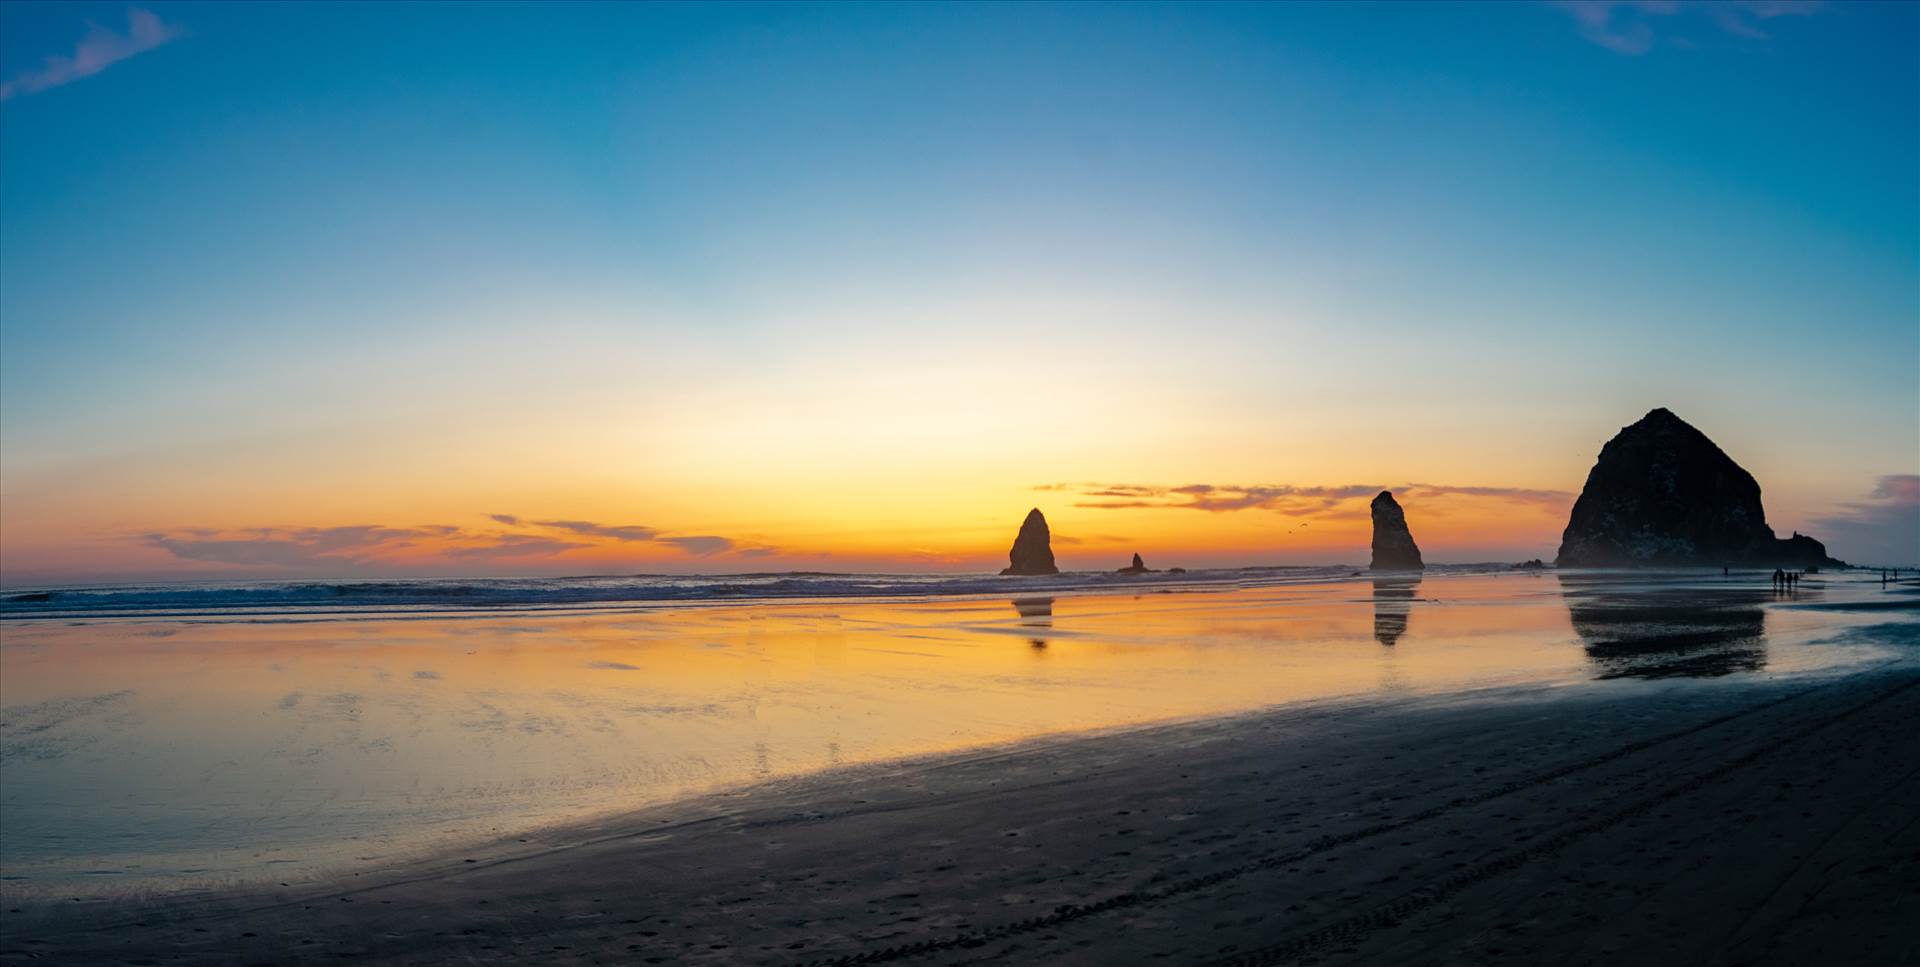 Haystack Rock Cannon Beach Oregon panorama 11MB.jpg  by travelphotographer65